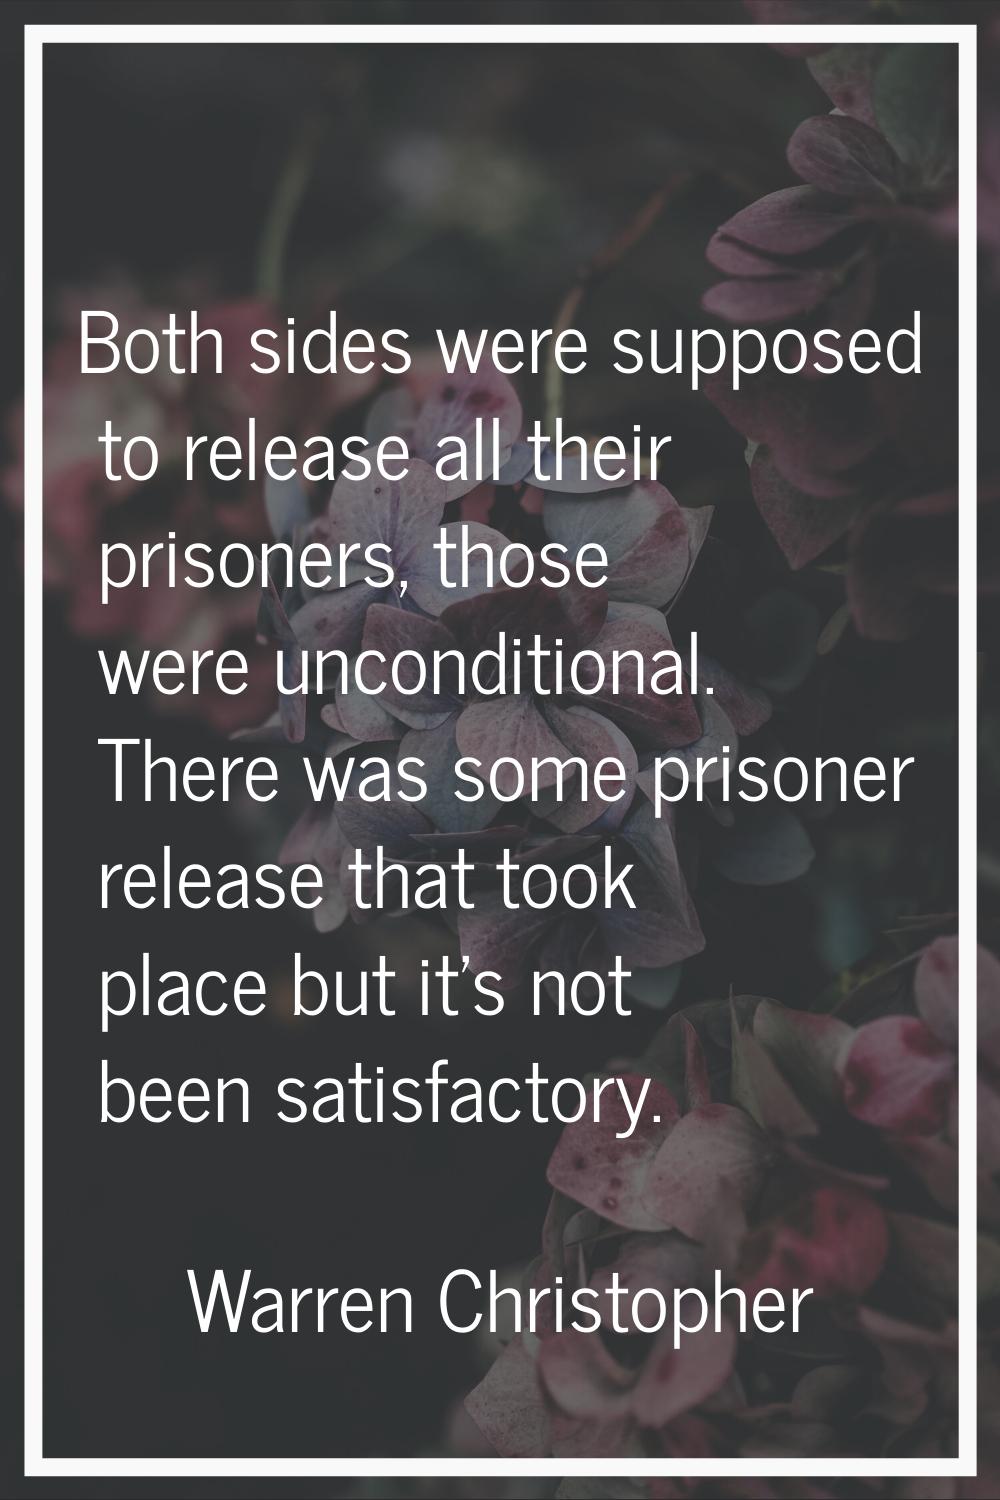 Both sides were supposed to release all their prisoners, those were unconditional. There was some p